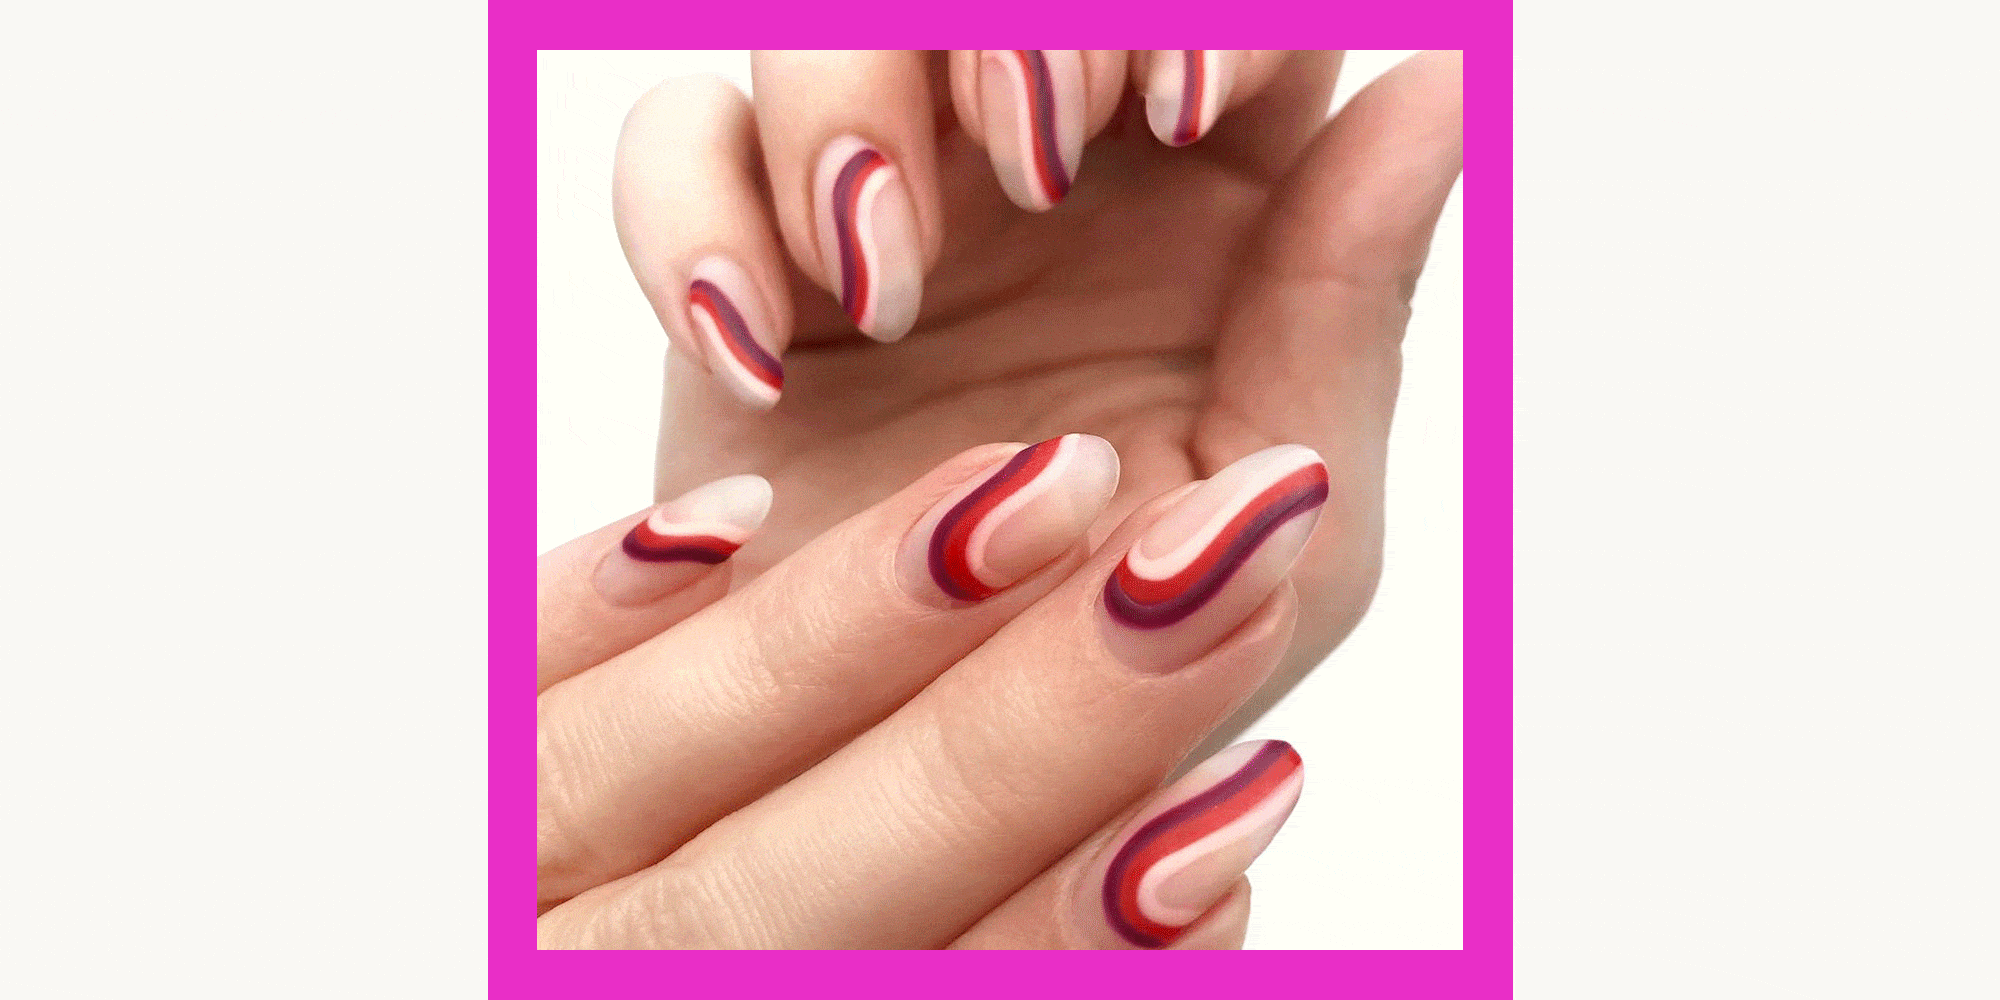 2. "Valentine's Day Nail Colors That Will Make Your Heart Flutter" - wide 2